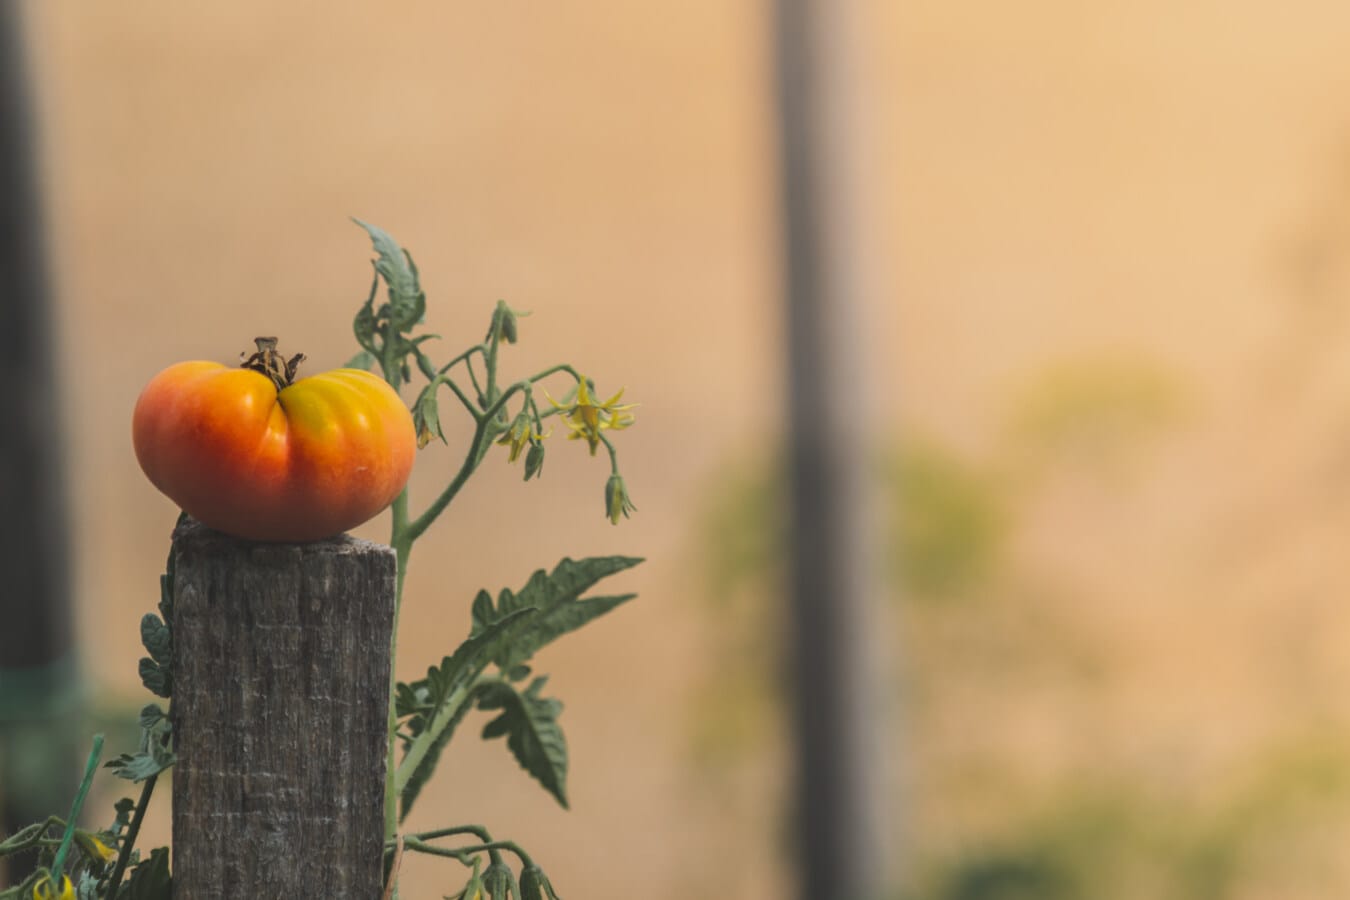 unripe, orange yellow, tomato, stick, wooden, rural, agriculture, food, vegetable, nature